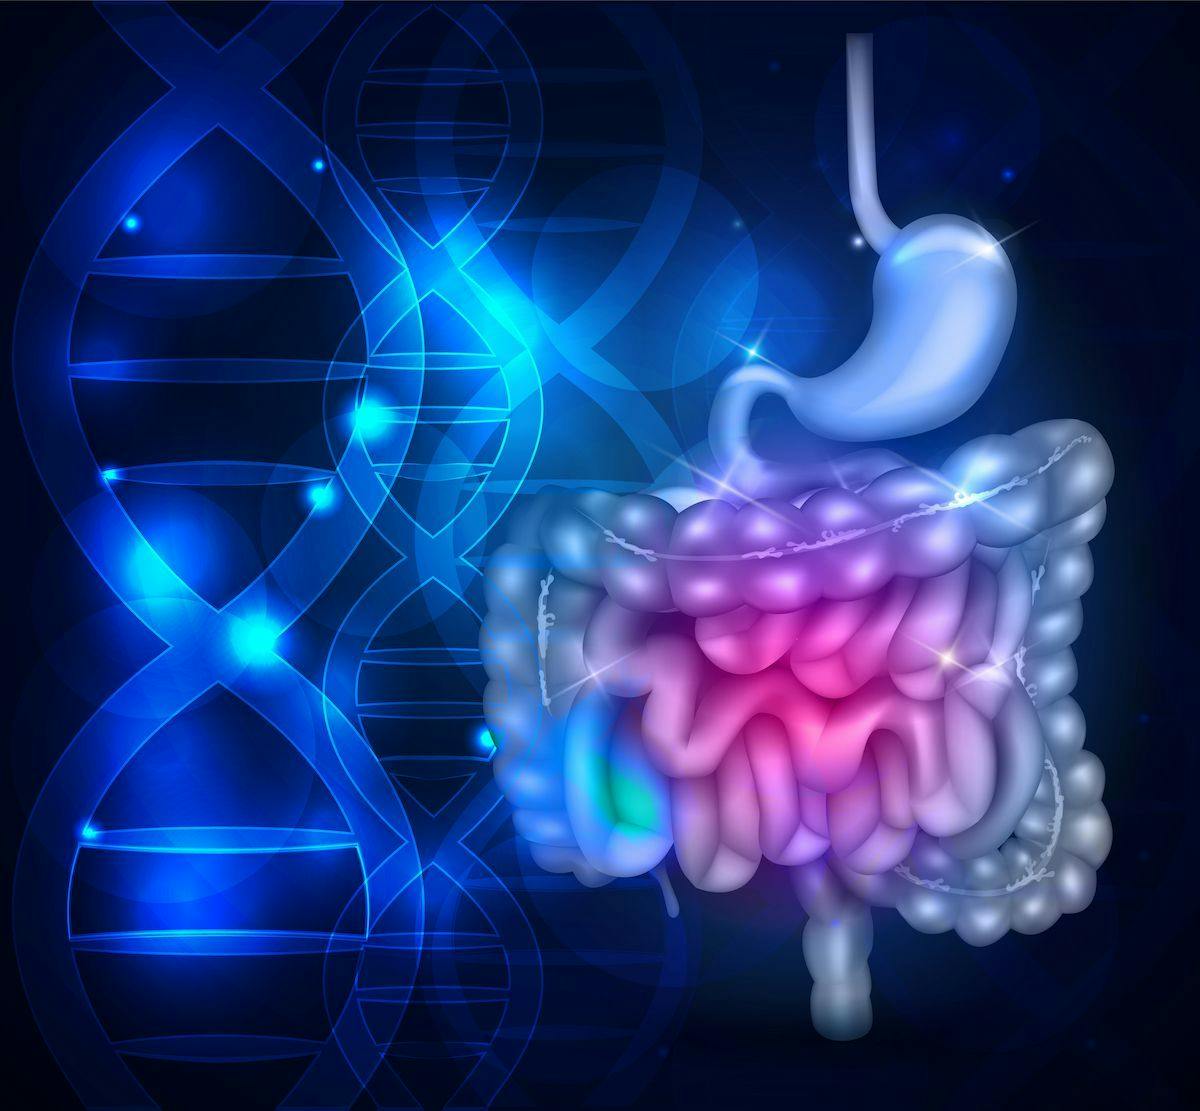 The new drug application that was submitted to the FDA for fruquintinib in refractory, metastatic colorectal cancer is supported by data from the phase 3 FRESCO-2 trial.